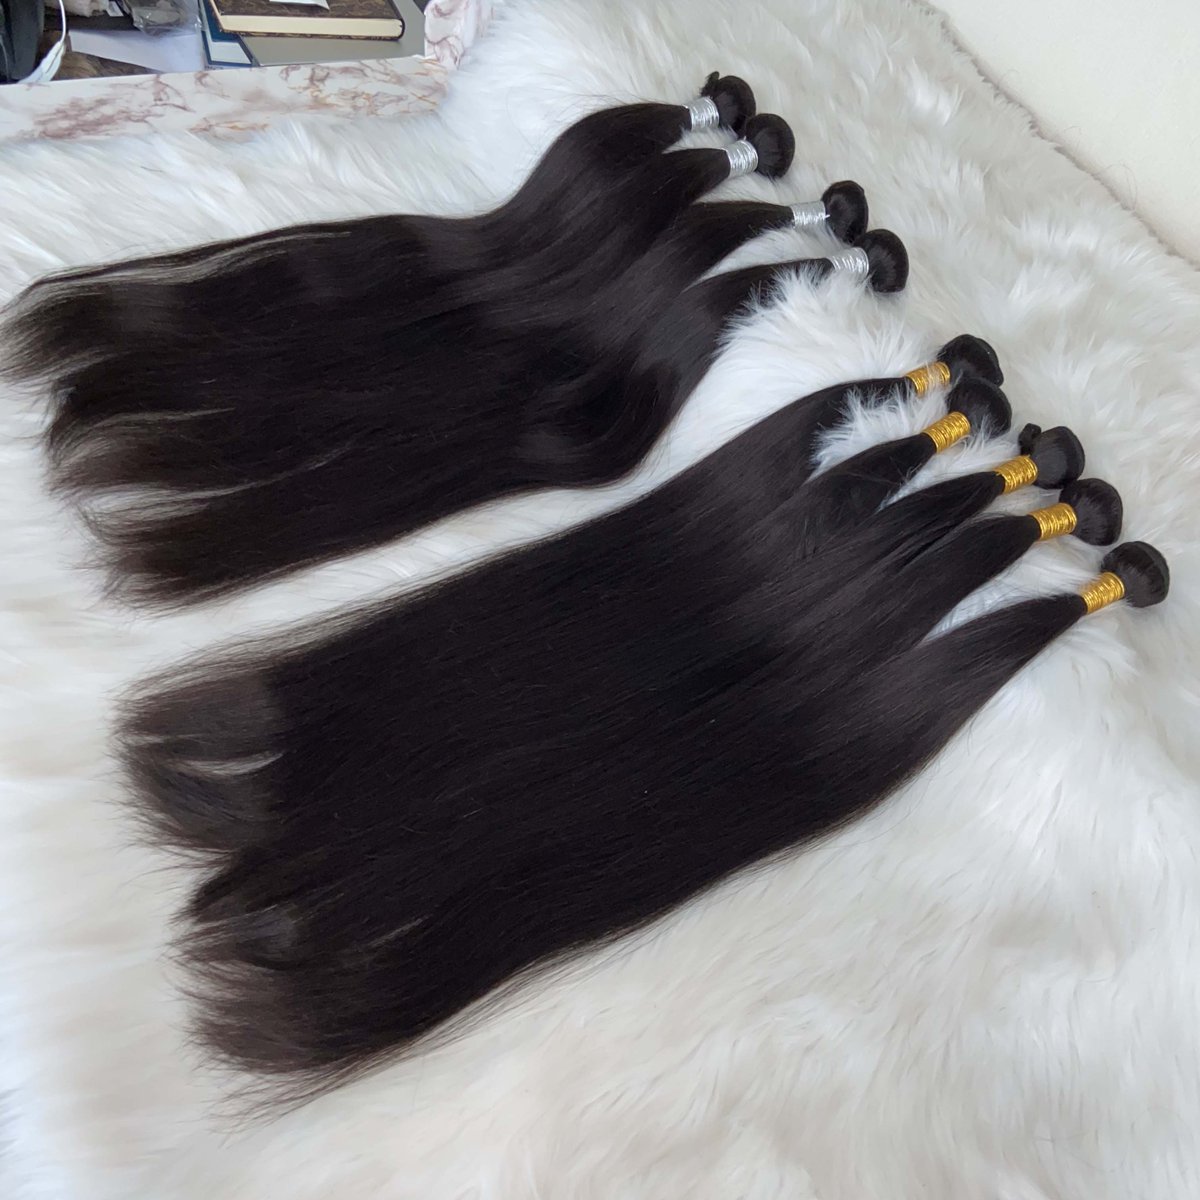 New One Hair Co., Ltd is a professional manufacturer for 10A grade Double Drawn Virgin Hair Bundles, contact us if needed. newonehairextensions.com/10a-grade-doub… #straightbundles #wavyhairbundles #blackhairbundles